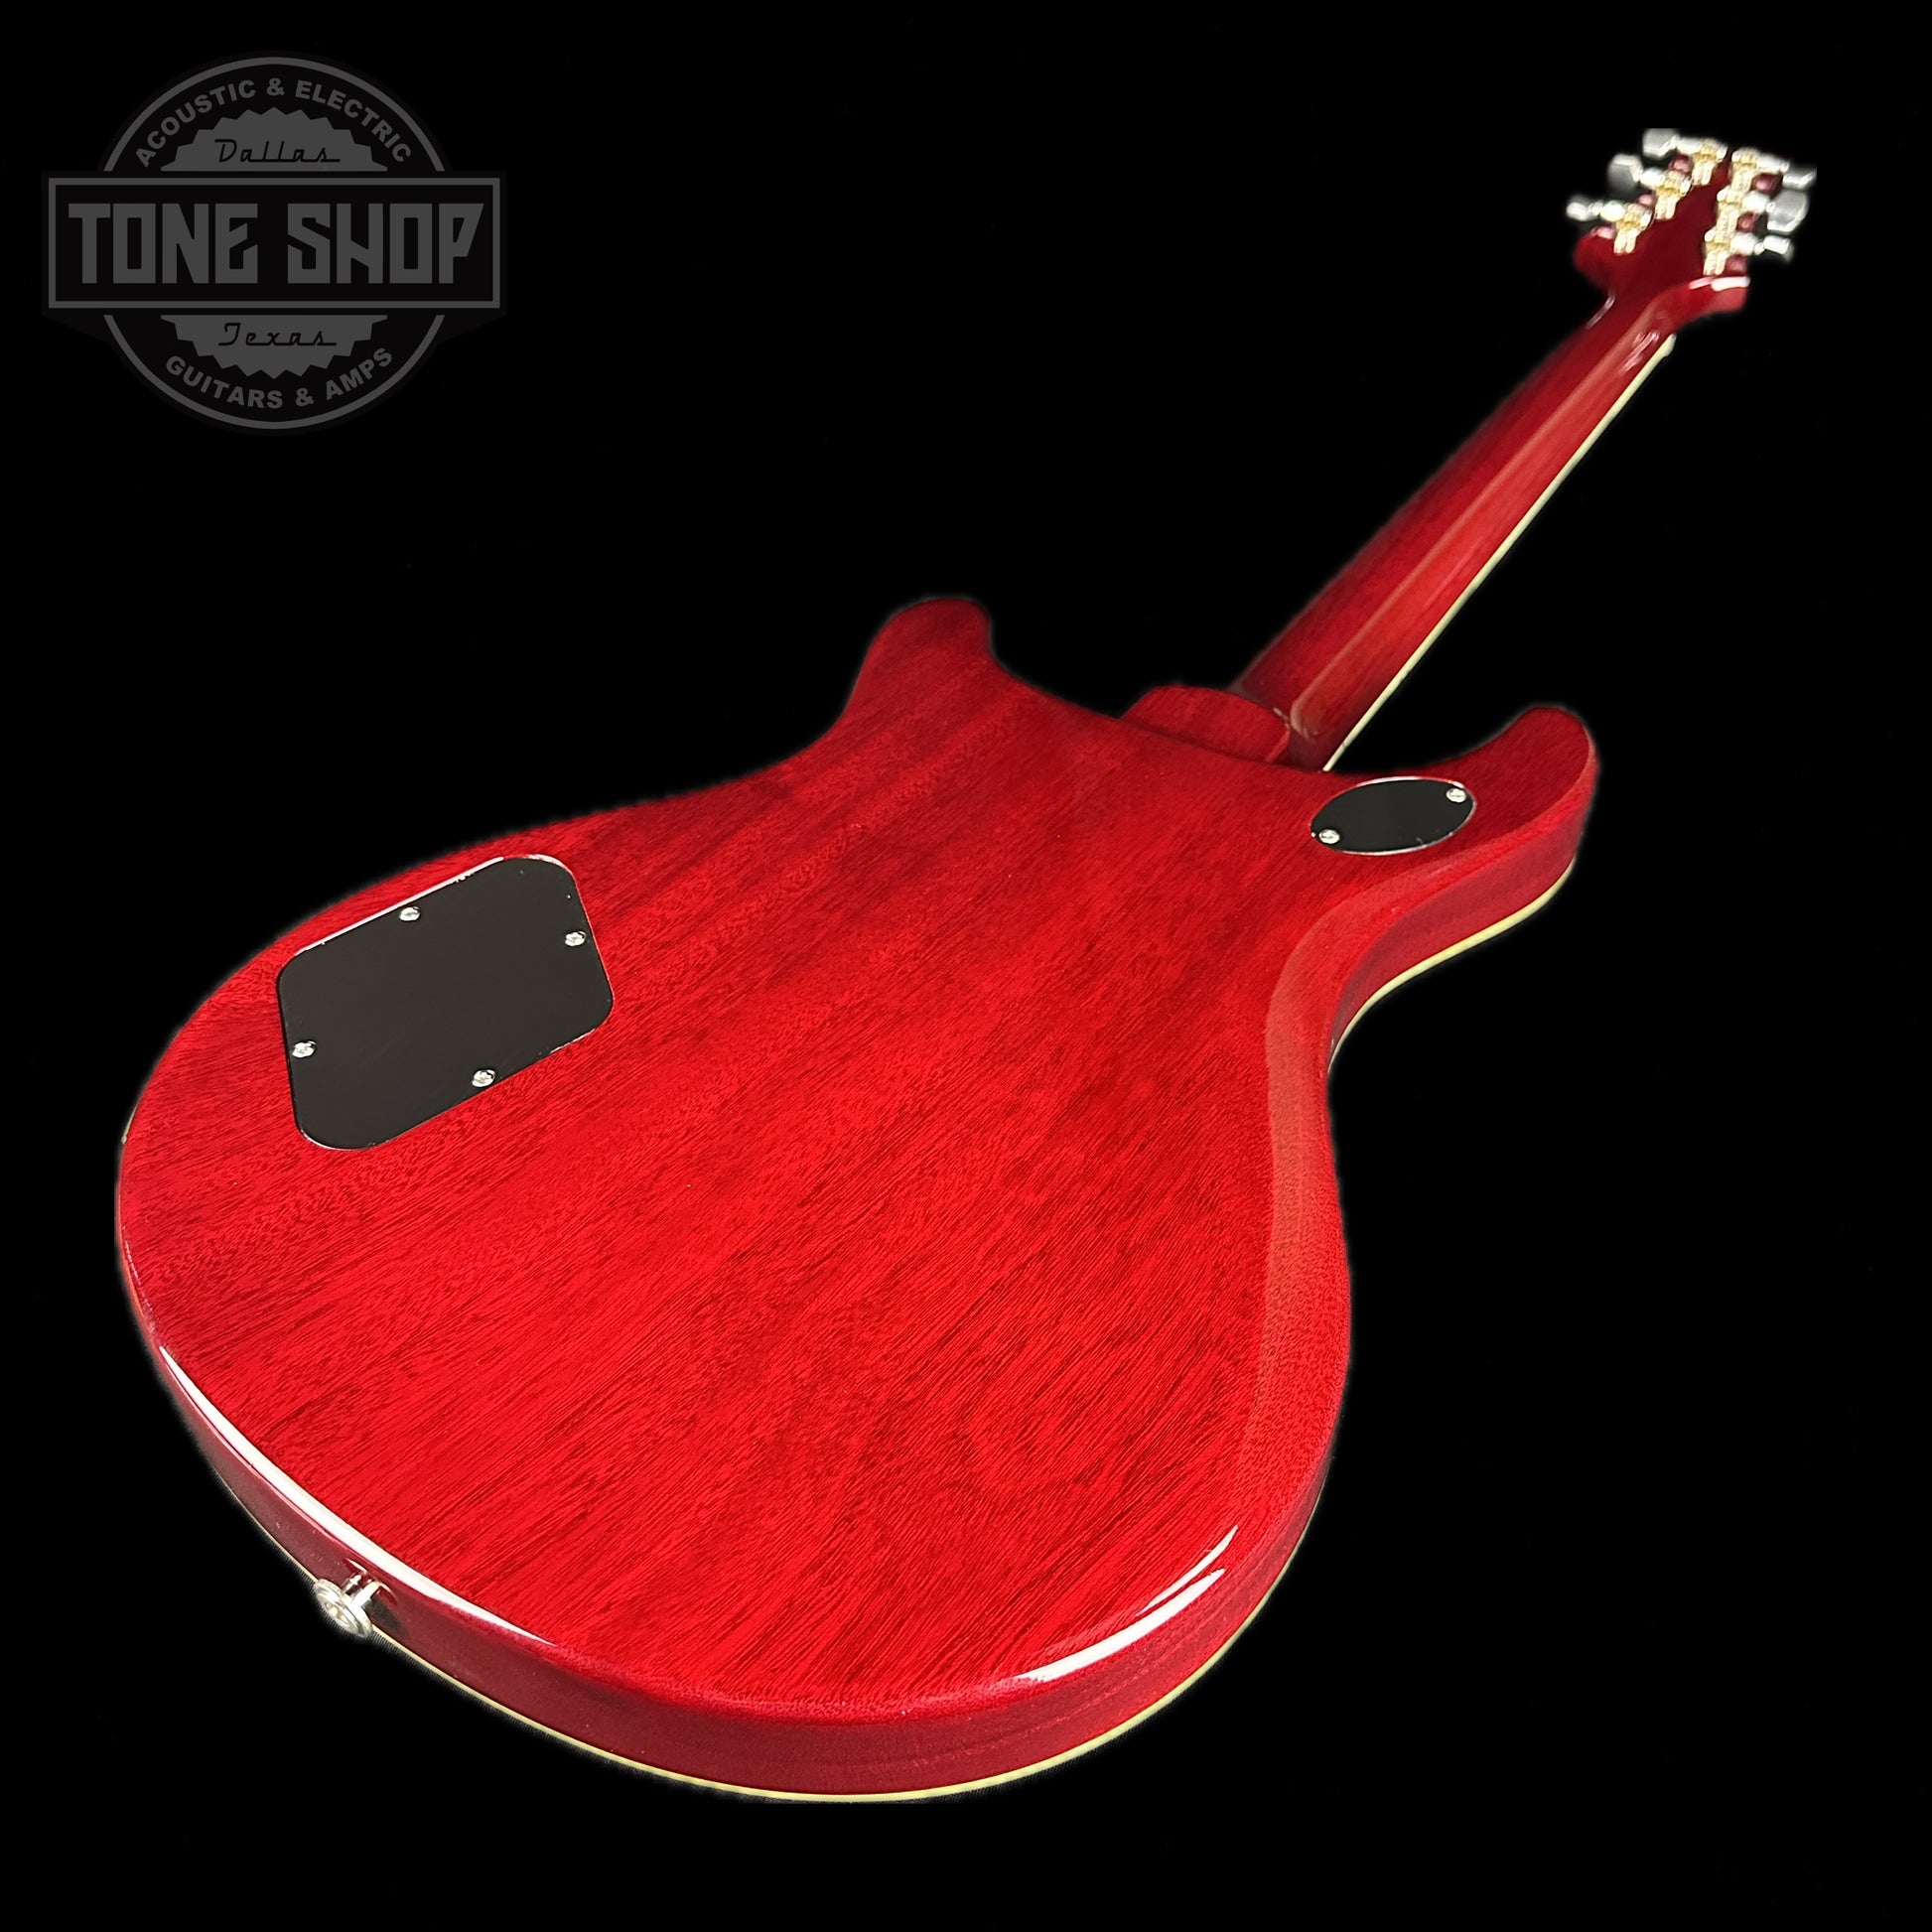 Back angle of Used 2019 PRS McCarty 594 Scarlet.